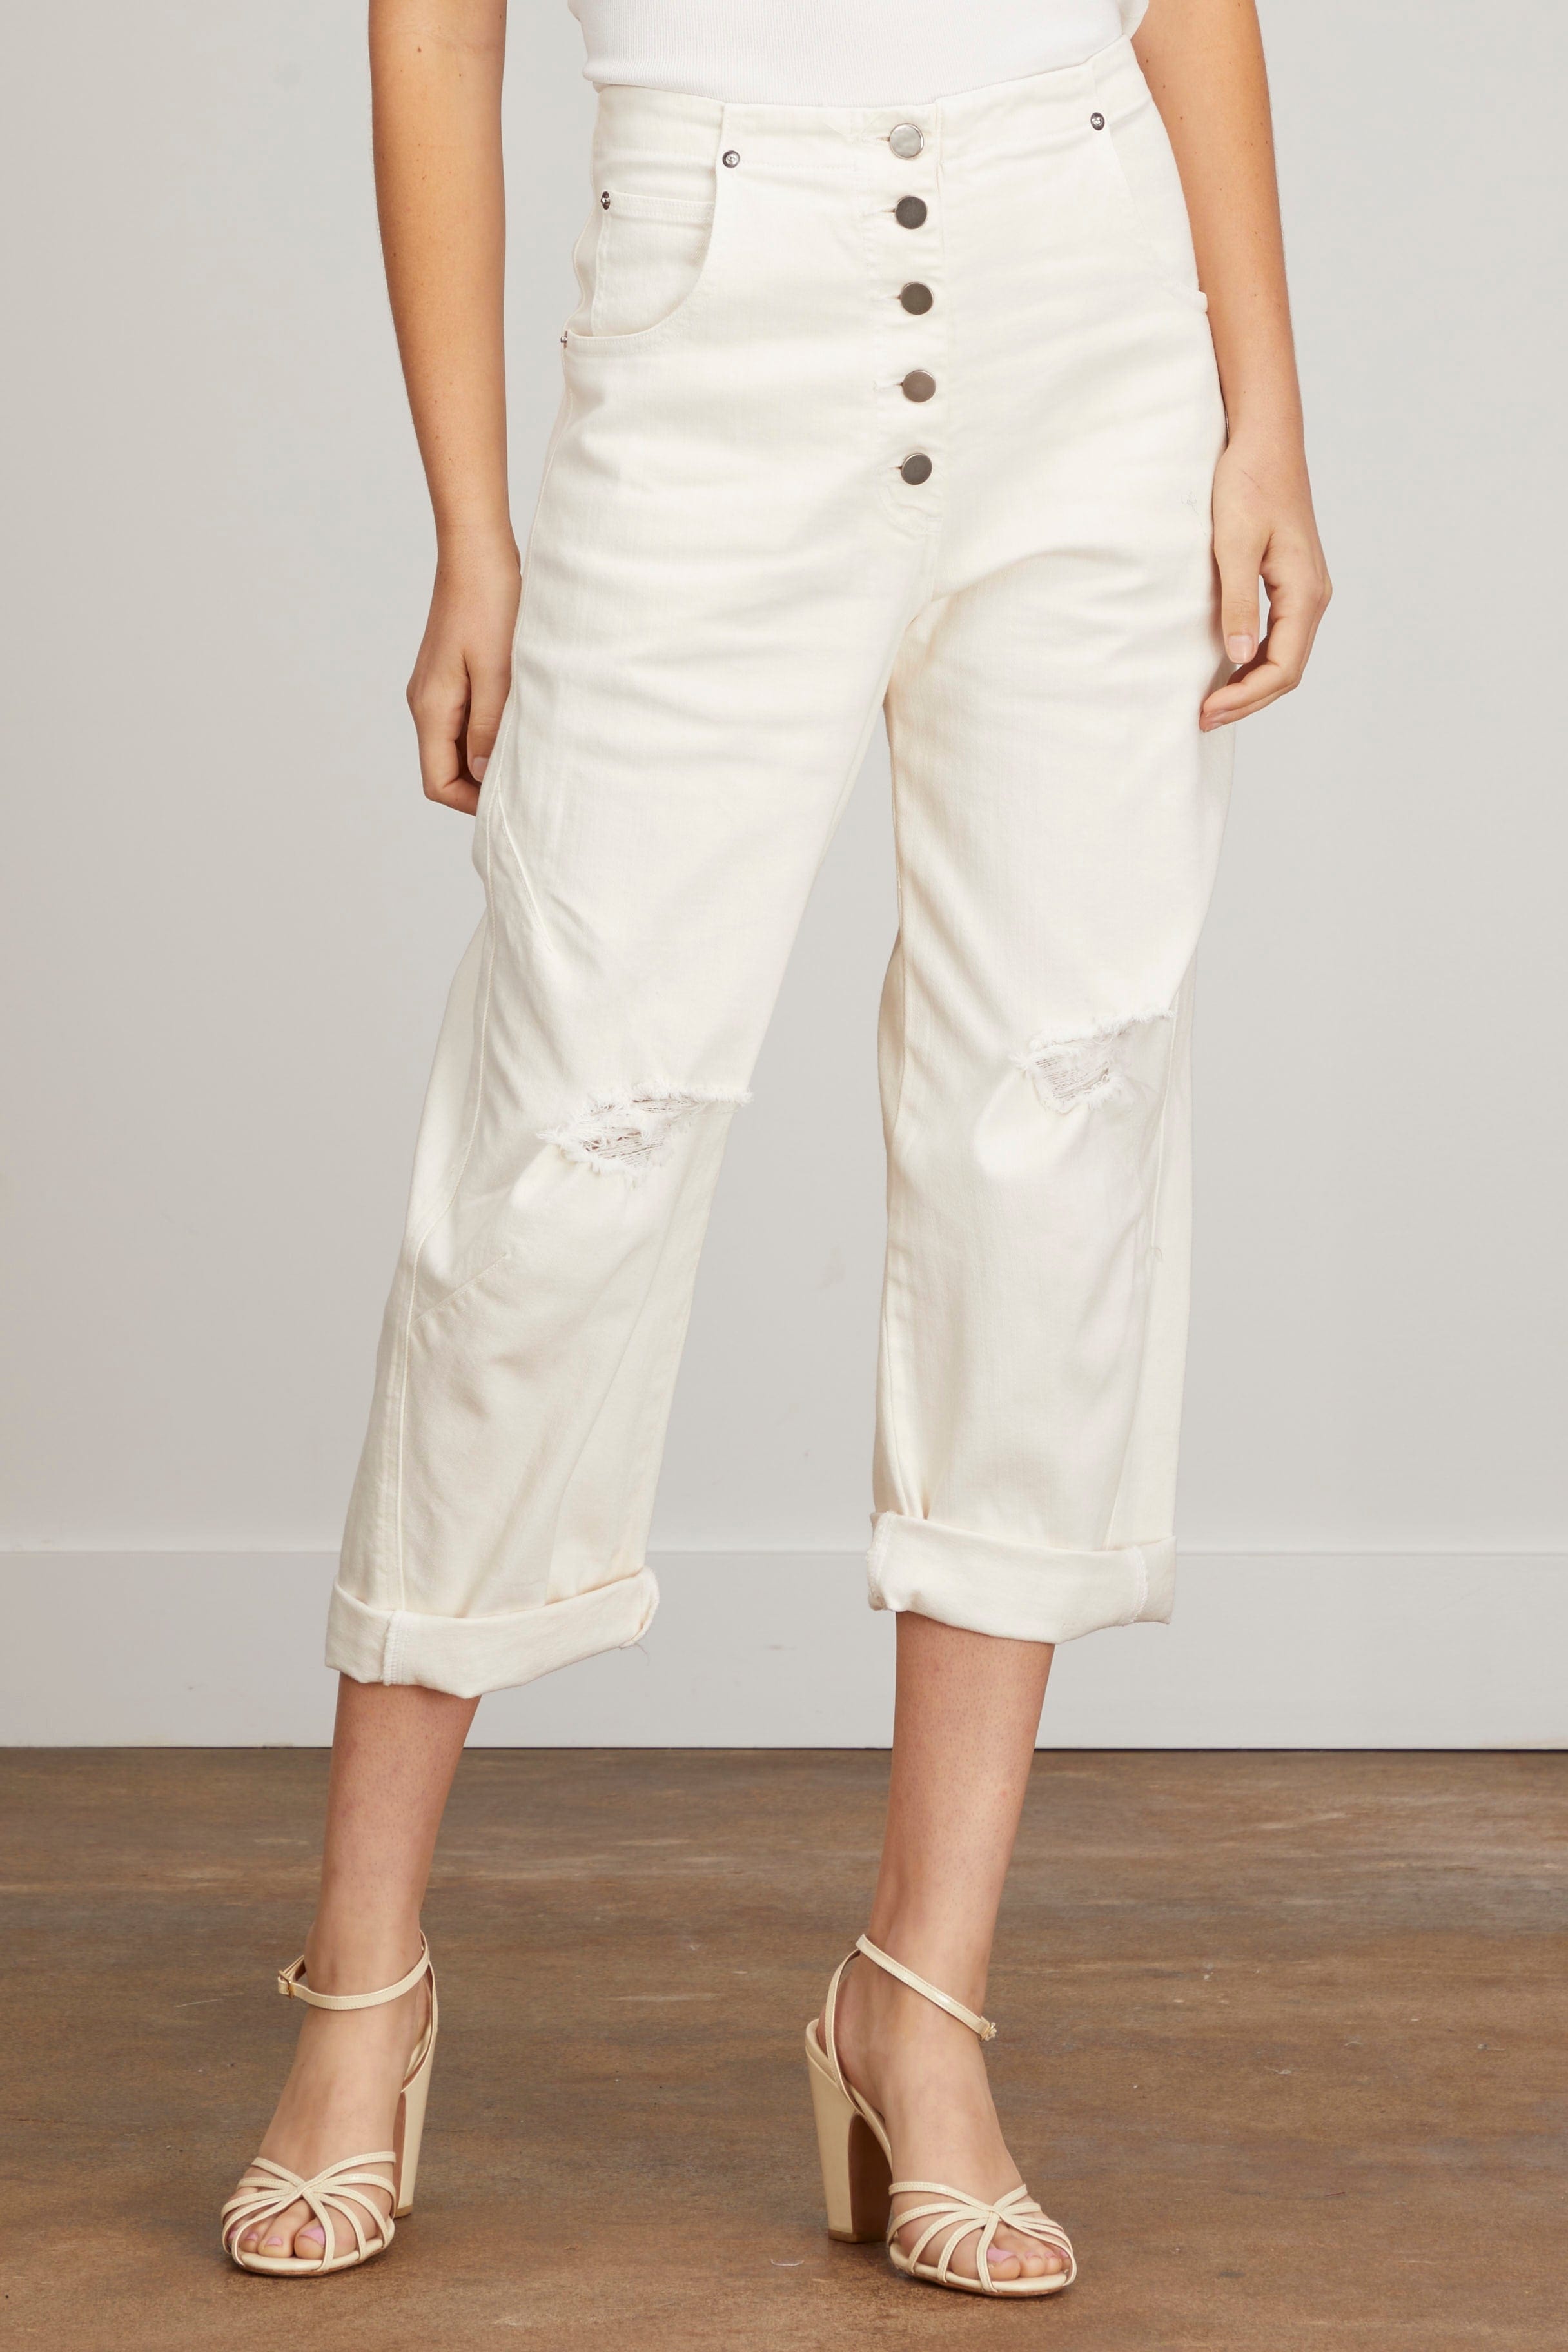 Wilkes Pant in Dirty White - 3